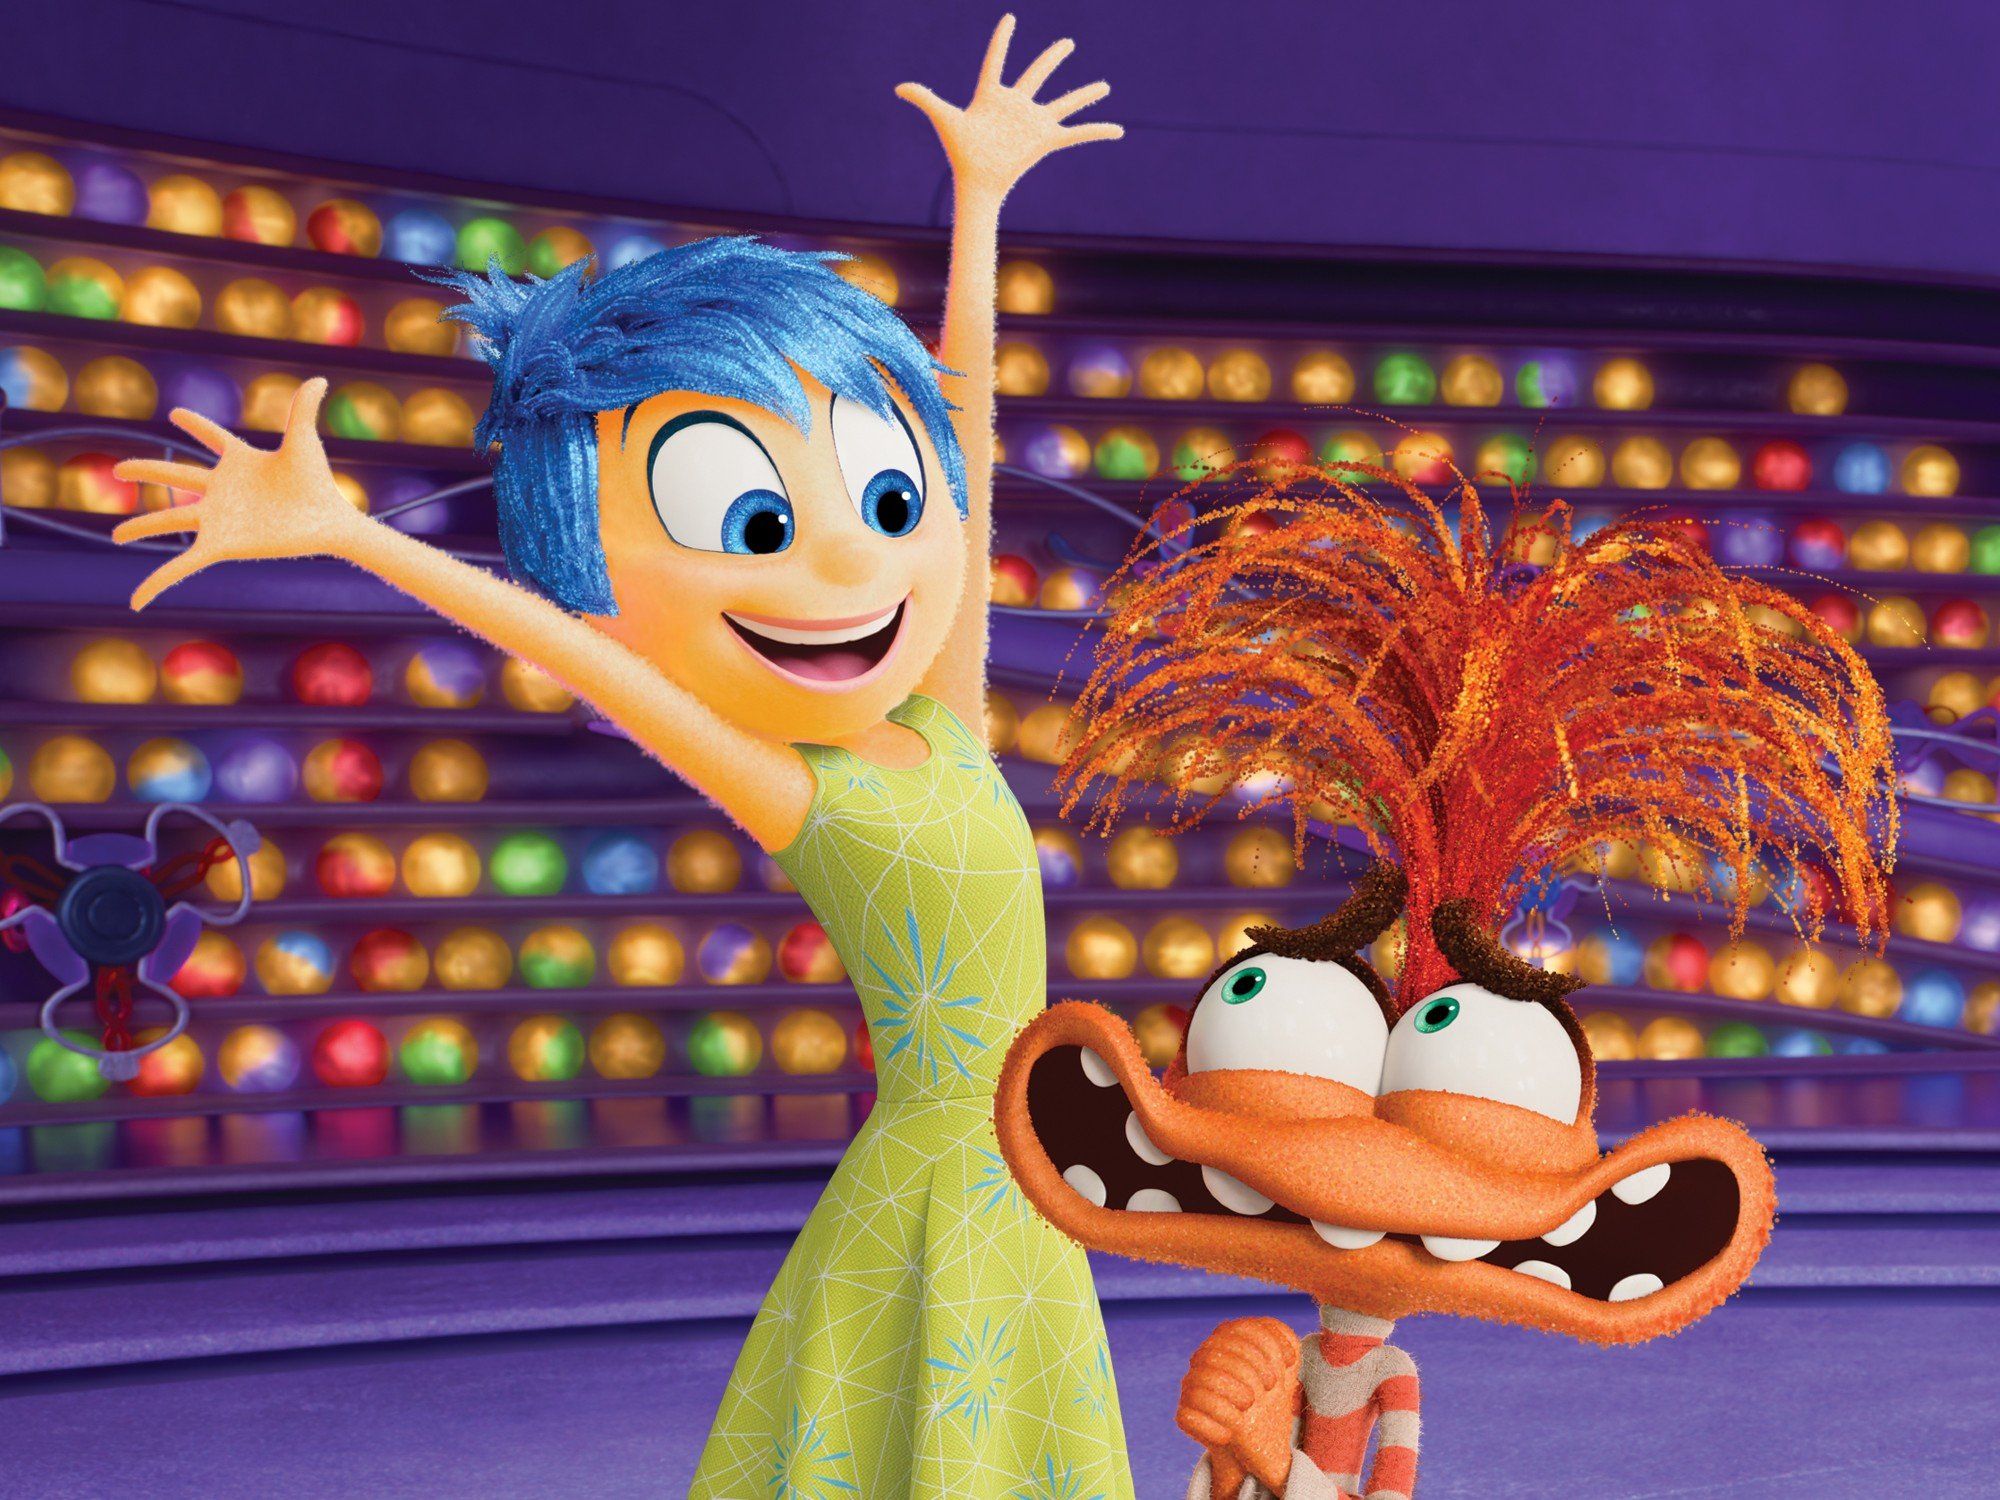 Joy (Amy Poehler) and Anxiety (Maya Hawke) in Inside Out 2